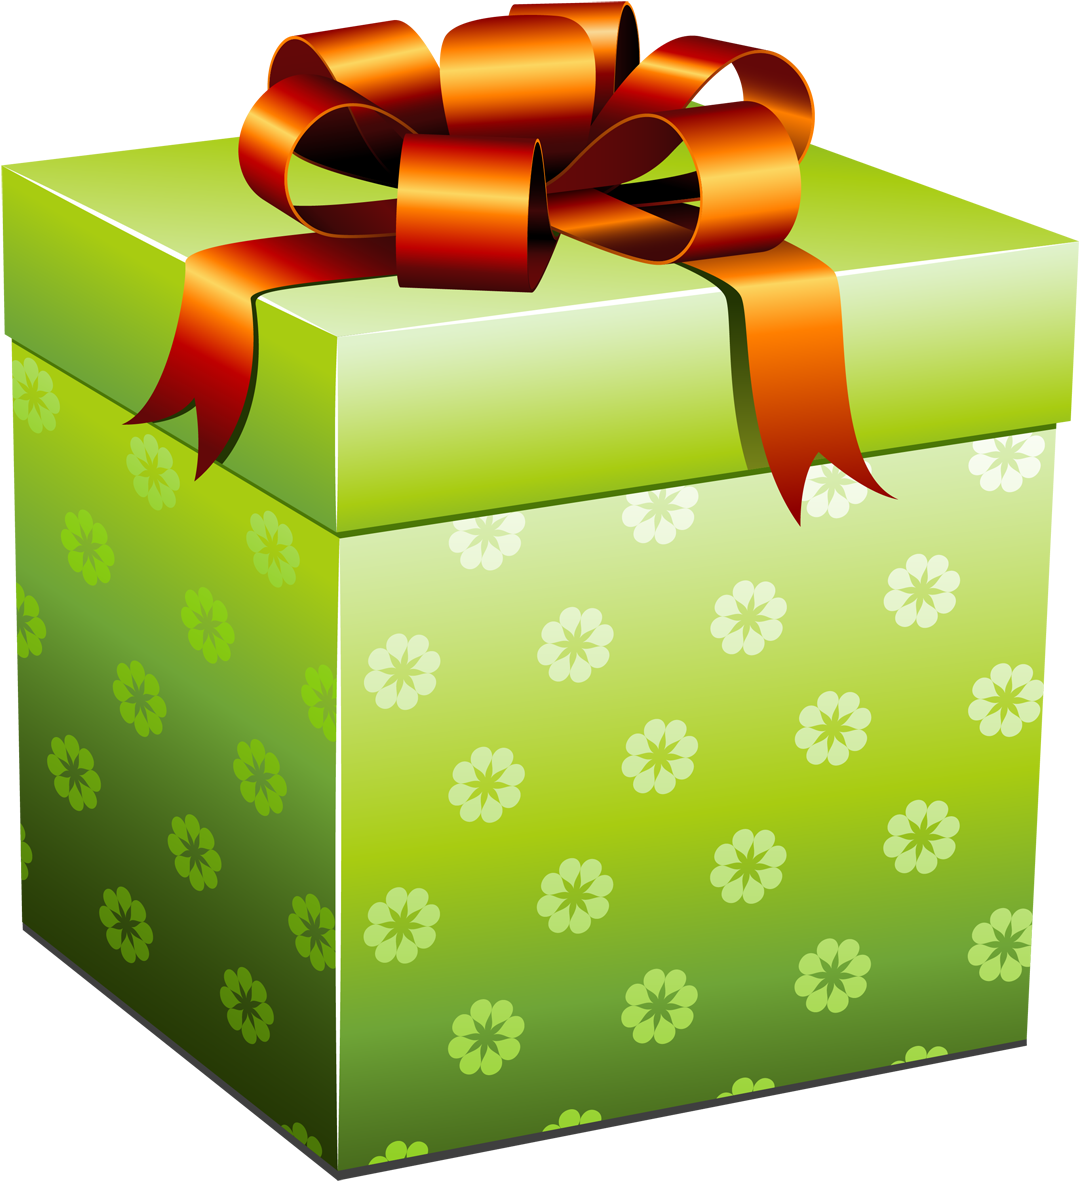 Green Present Box With Red Bow Png Picture - Earthlanderpro 50 Feet Expandable Durable Hose Metal (1200x1242)